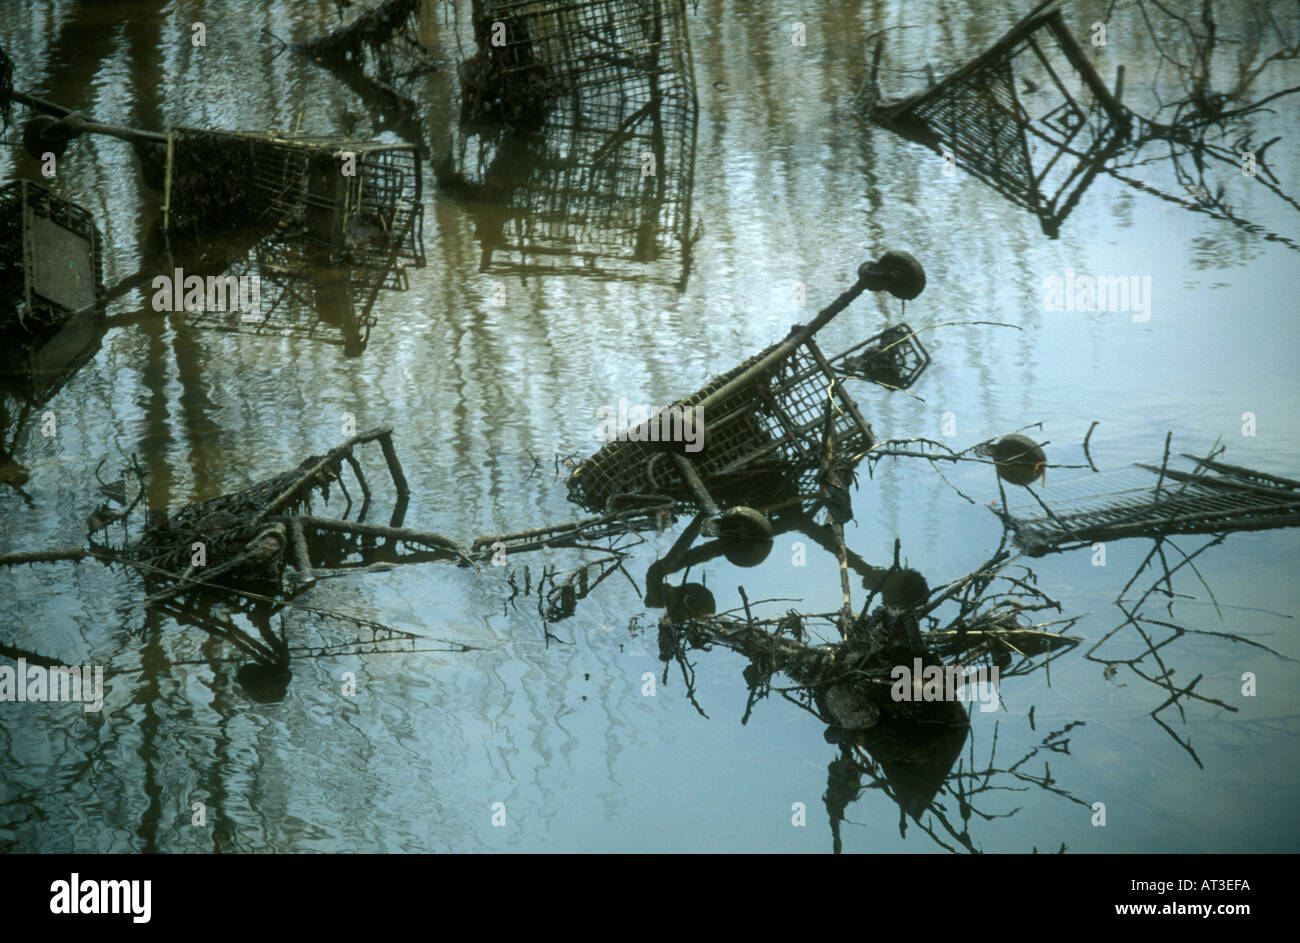 Shopping trollies and other debris in River Frome, Somerset, England Stock Photo